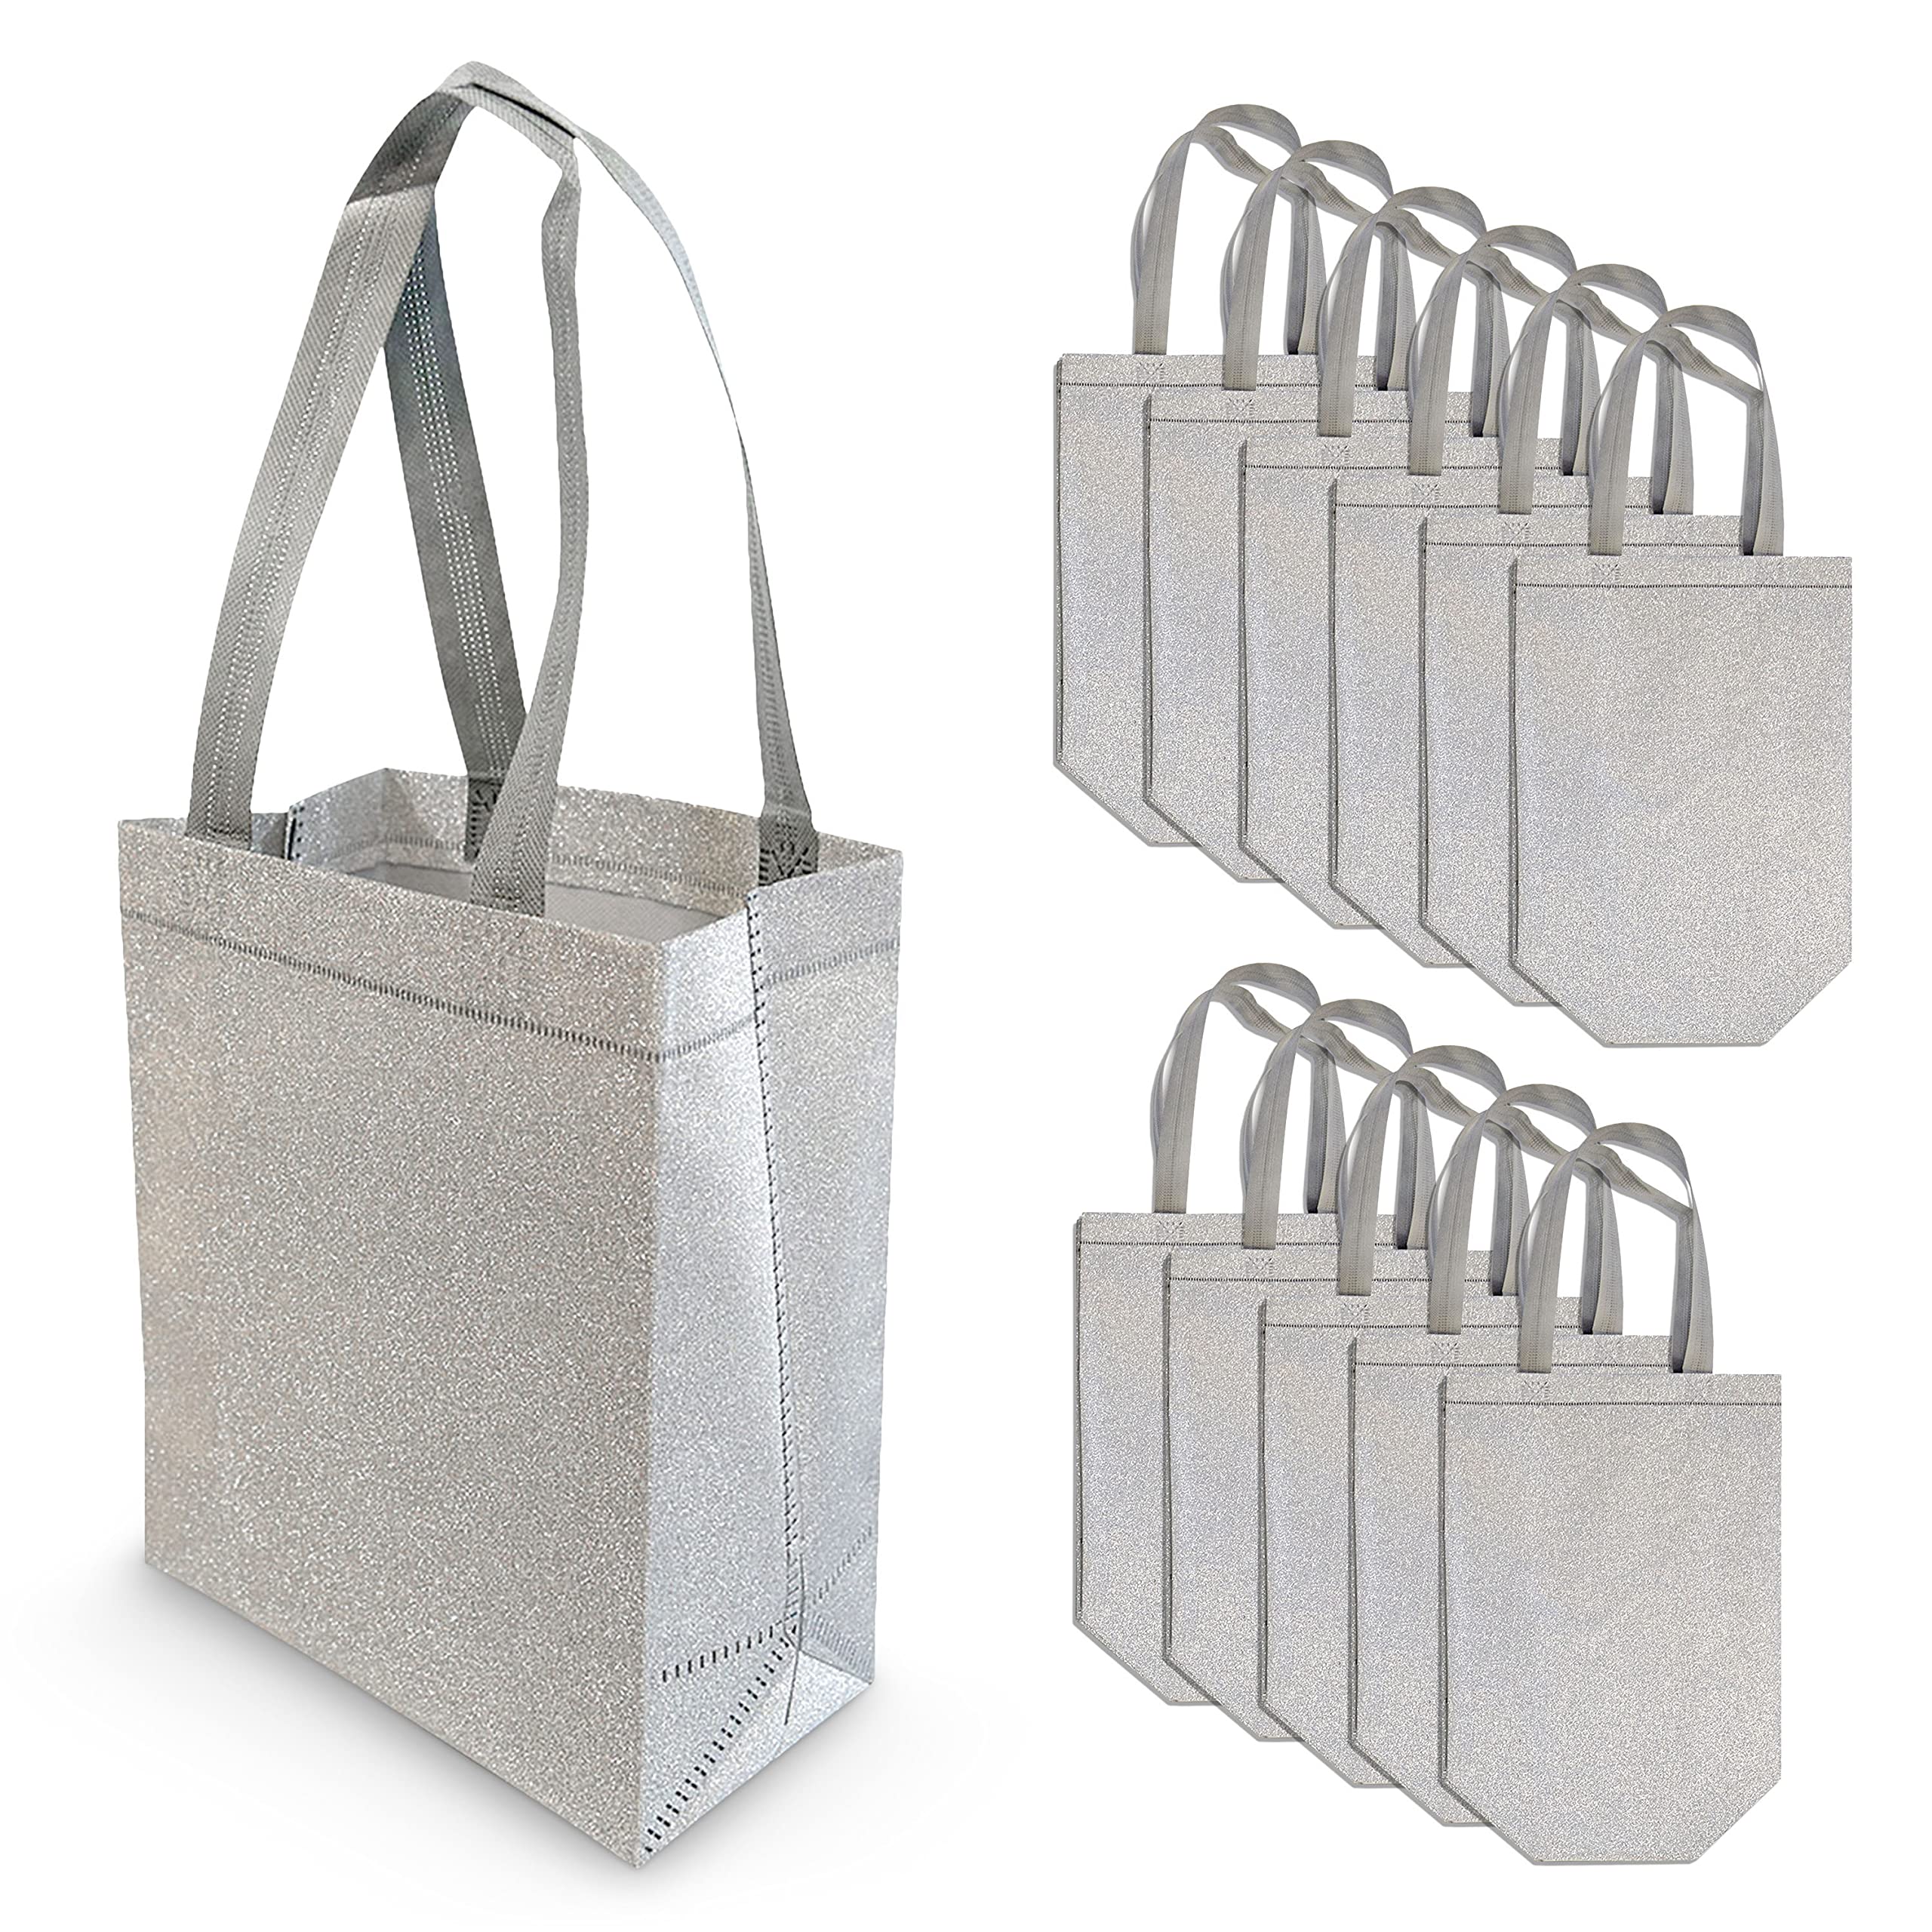 OccasionALL 6x3x8 12 Piece Small Reusable Gift Bags with Handles, Silver Christmas Party Gift Bags for Kids, Small Reusable Grocery Bags Shopping Bags  - Like New